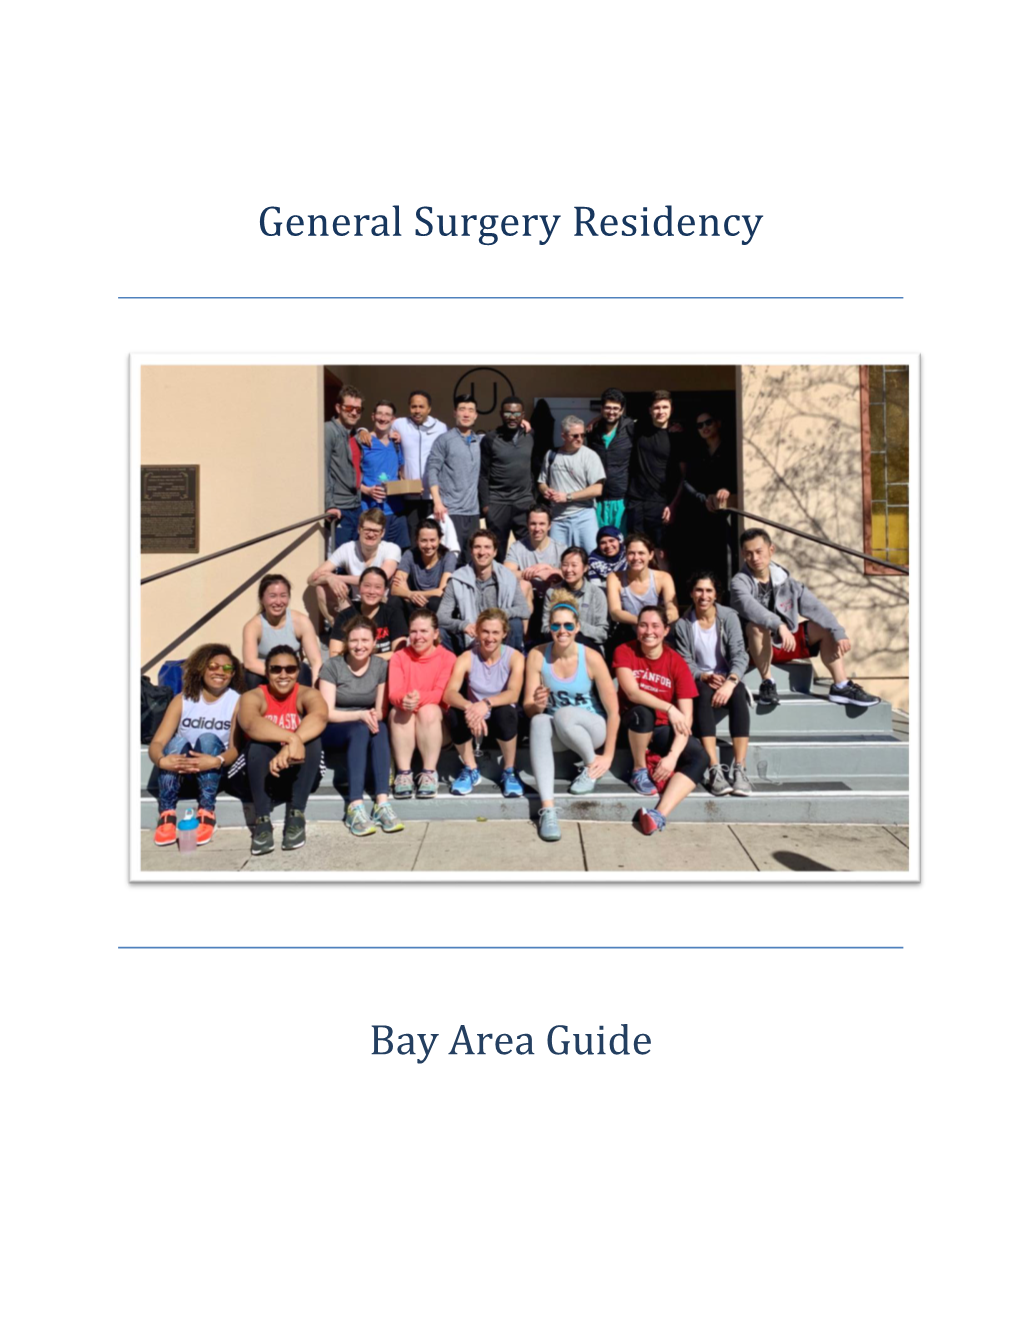 General Surgery Residency Bay Area Guide